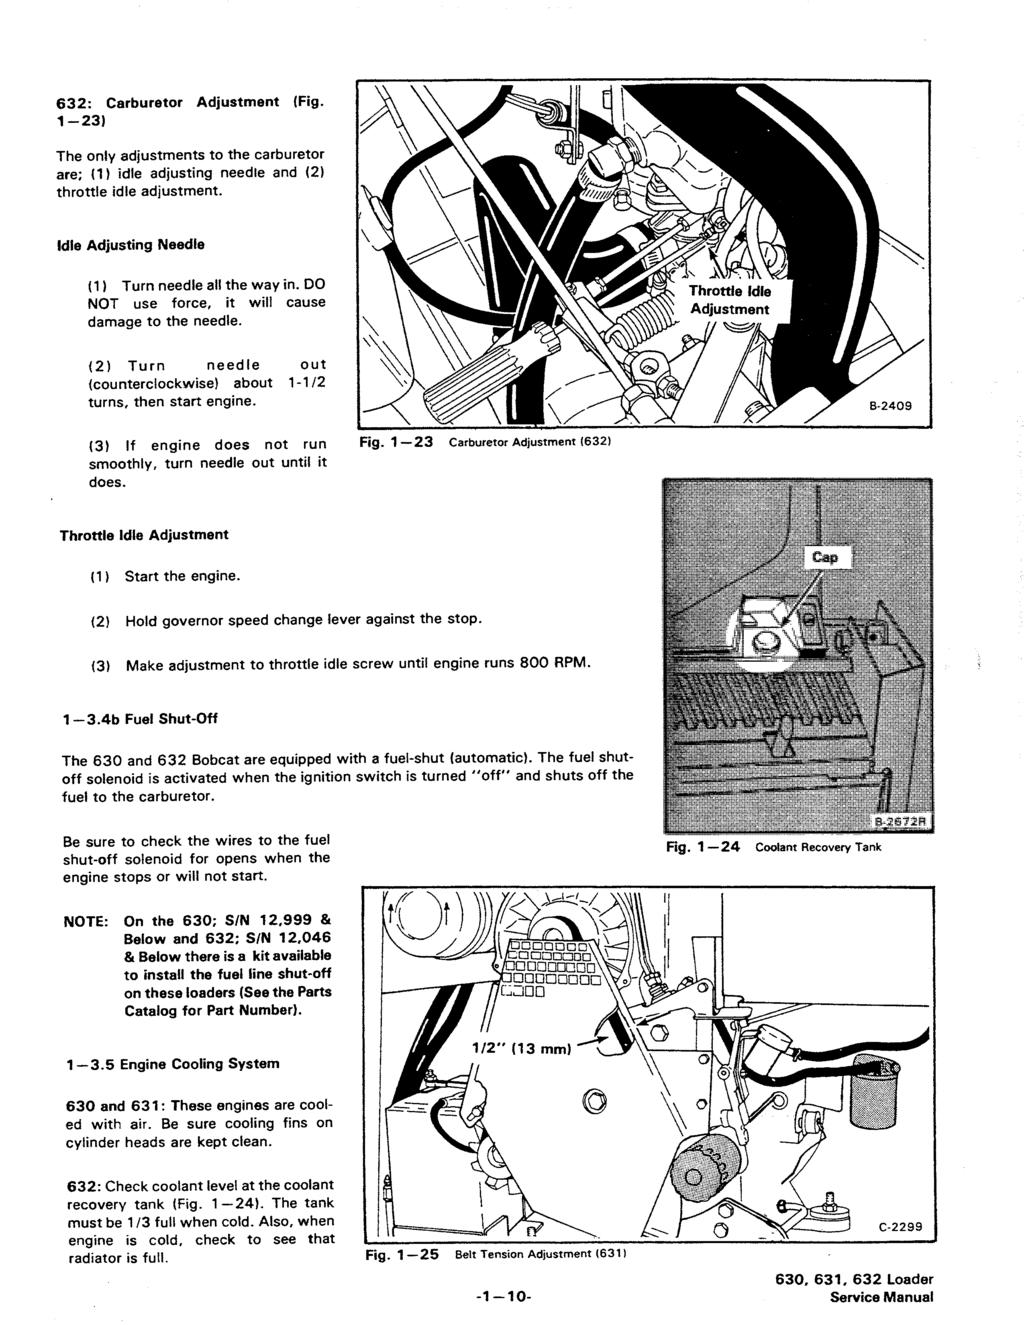 632: Carburetor Adjustment (Fig. 1-23) The only adjustments to the carburetor are; (1 I idle adjusting needle and (2) throttle idle adjustment. Idle Adjusting Needle (1) Turn needle all the way in.